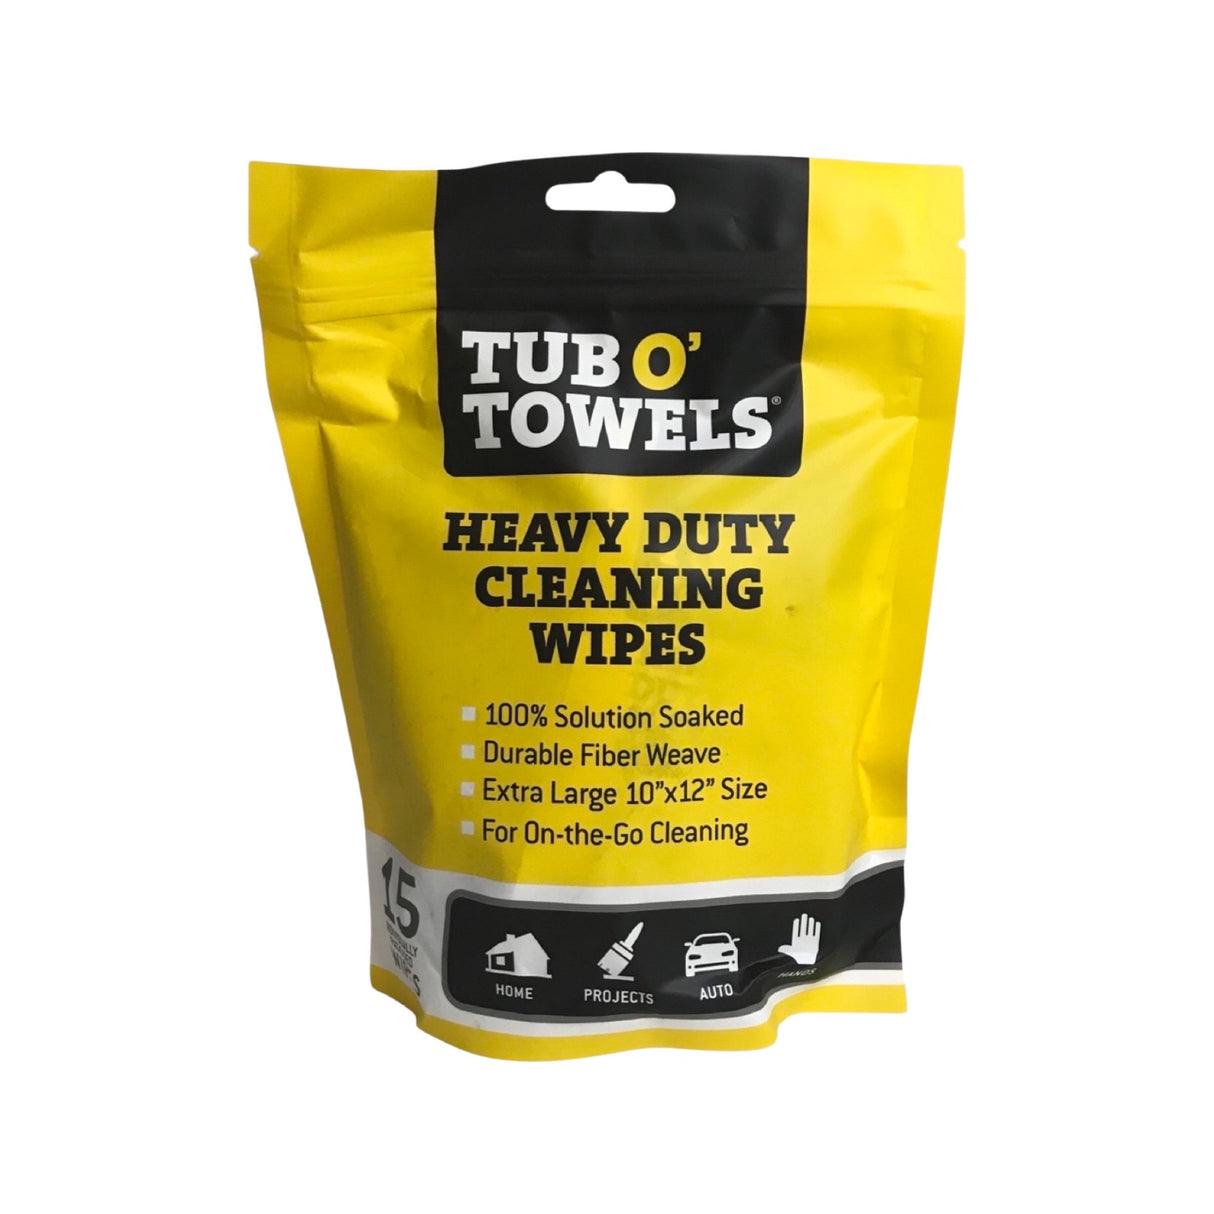 Tub O' Towels TW01-15 - Heavy Duty Multi-Surface Cleaning Wipes - 15 ct.